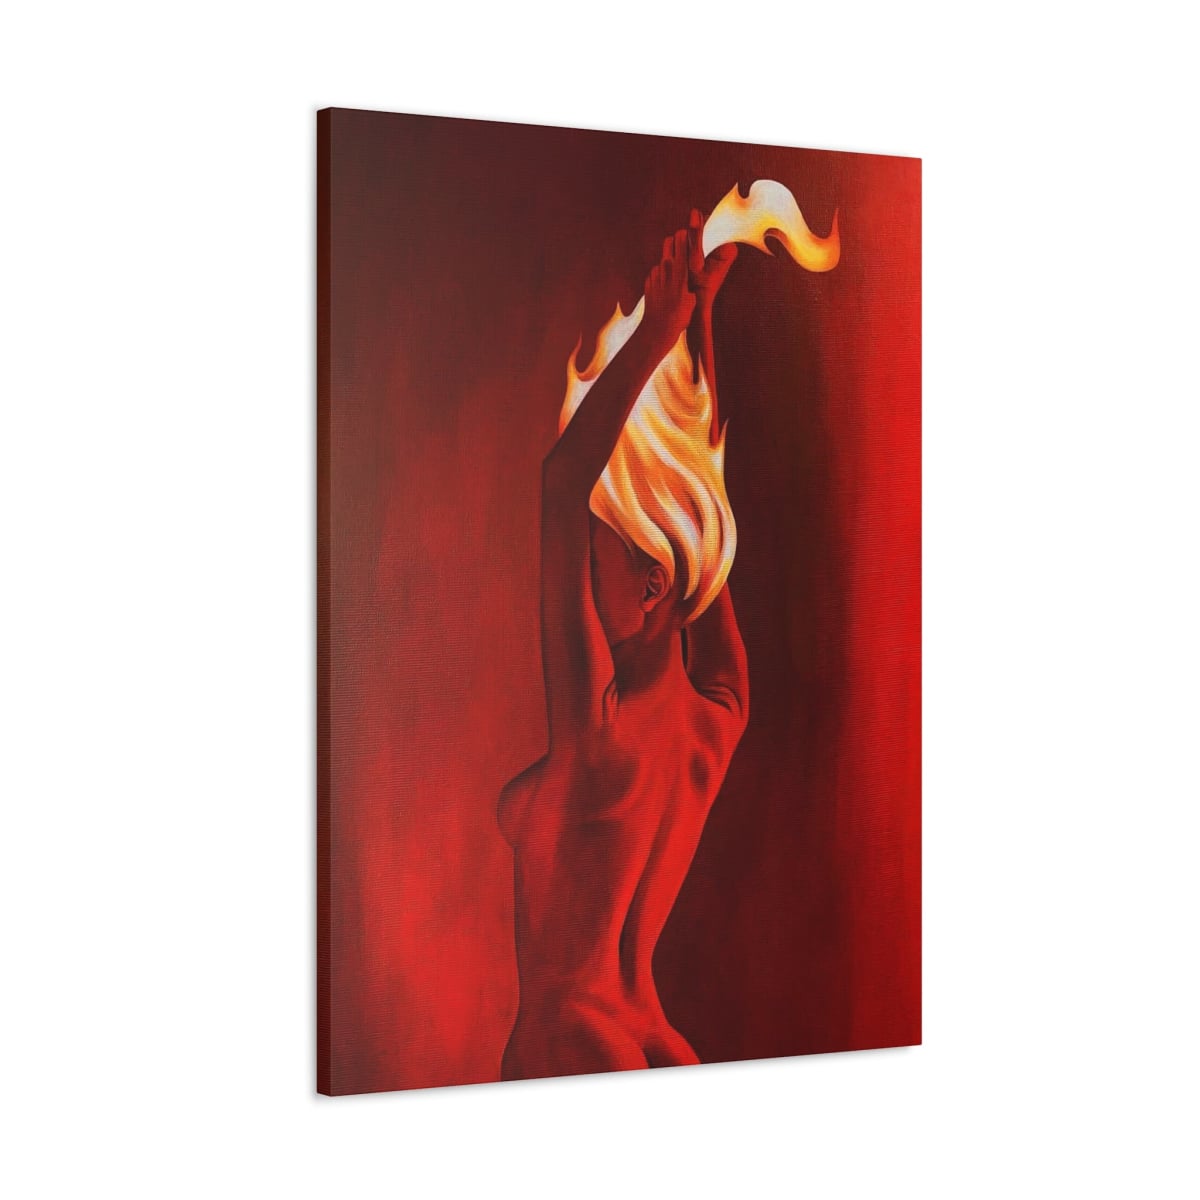 Vibrant Red Flame Canvas Print